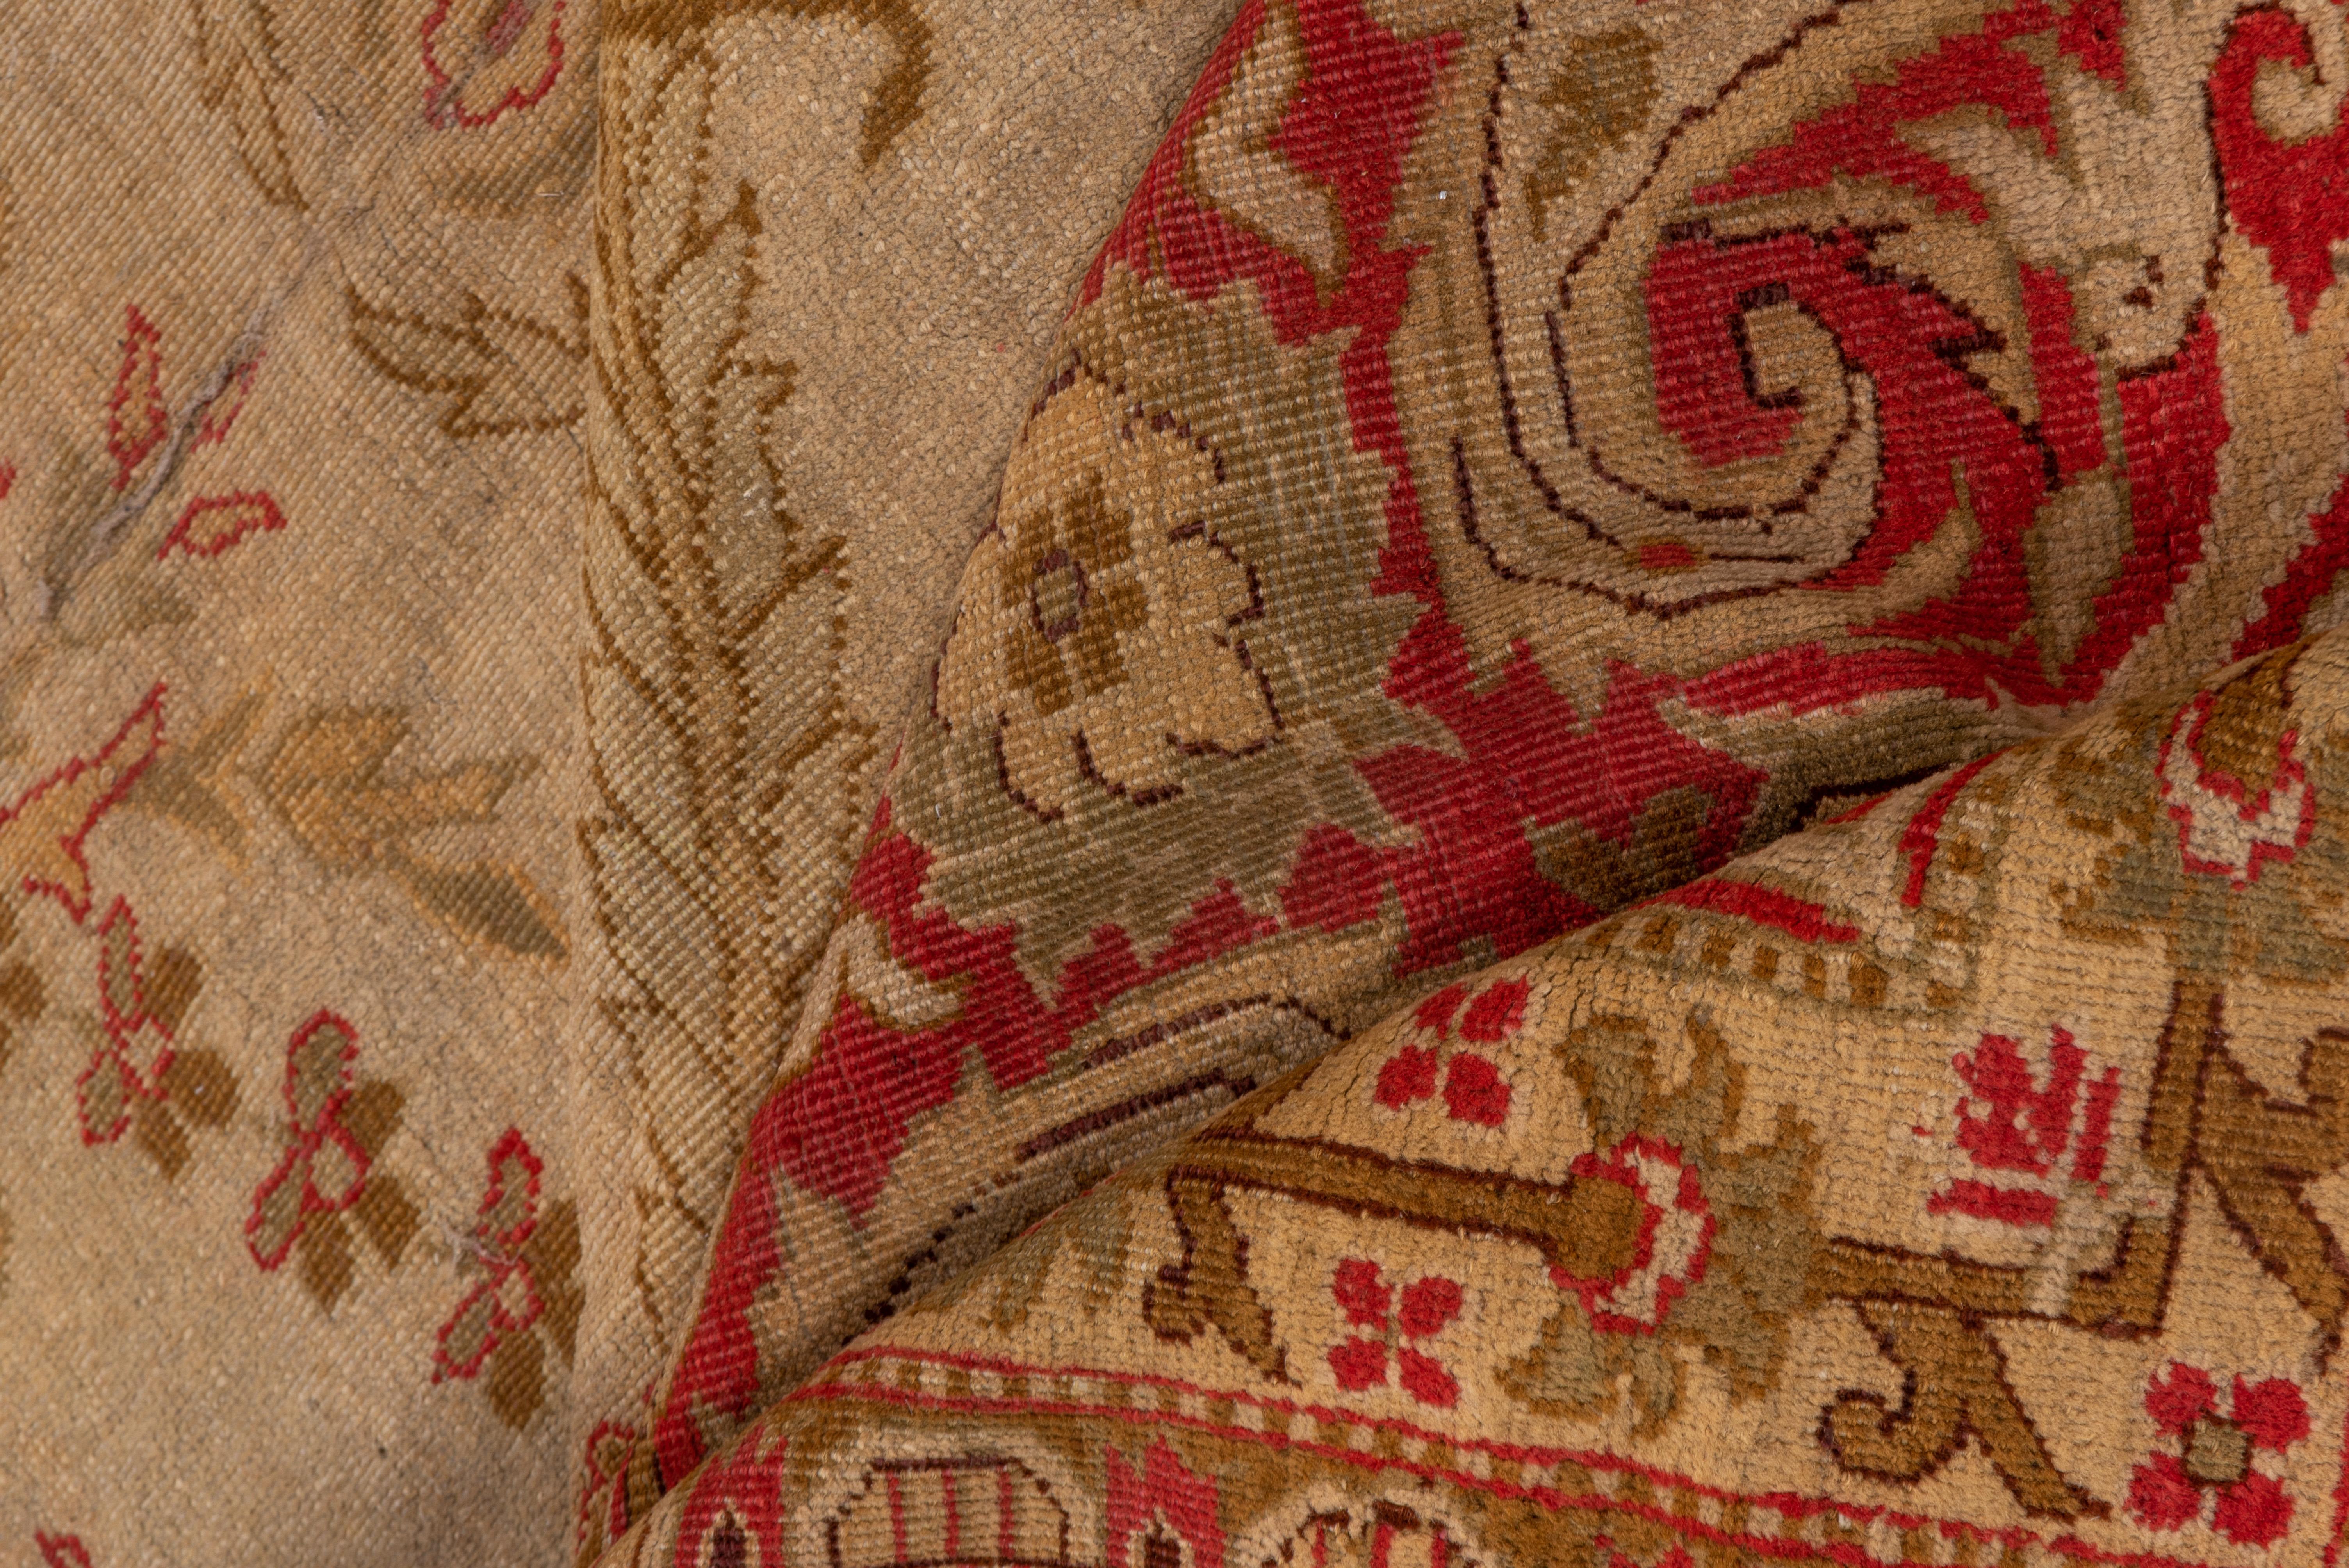 Antique Indian Agra Carpet, Yellow and Red Tones, 1910s, Red Border In Good Condition For Sale In New York, NY